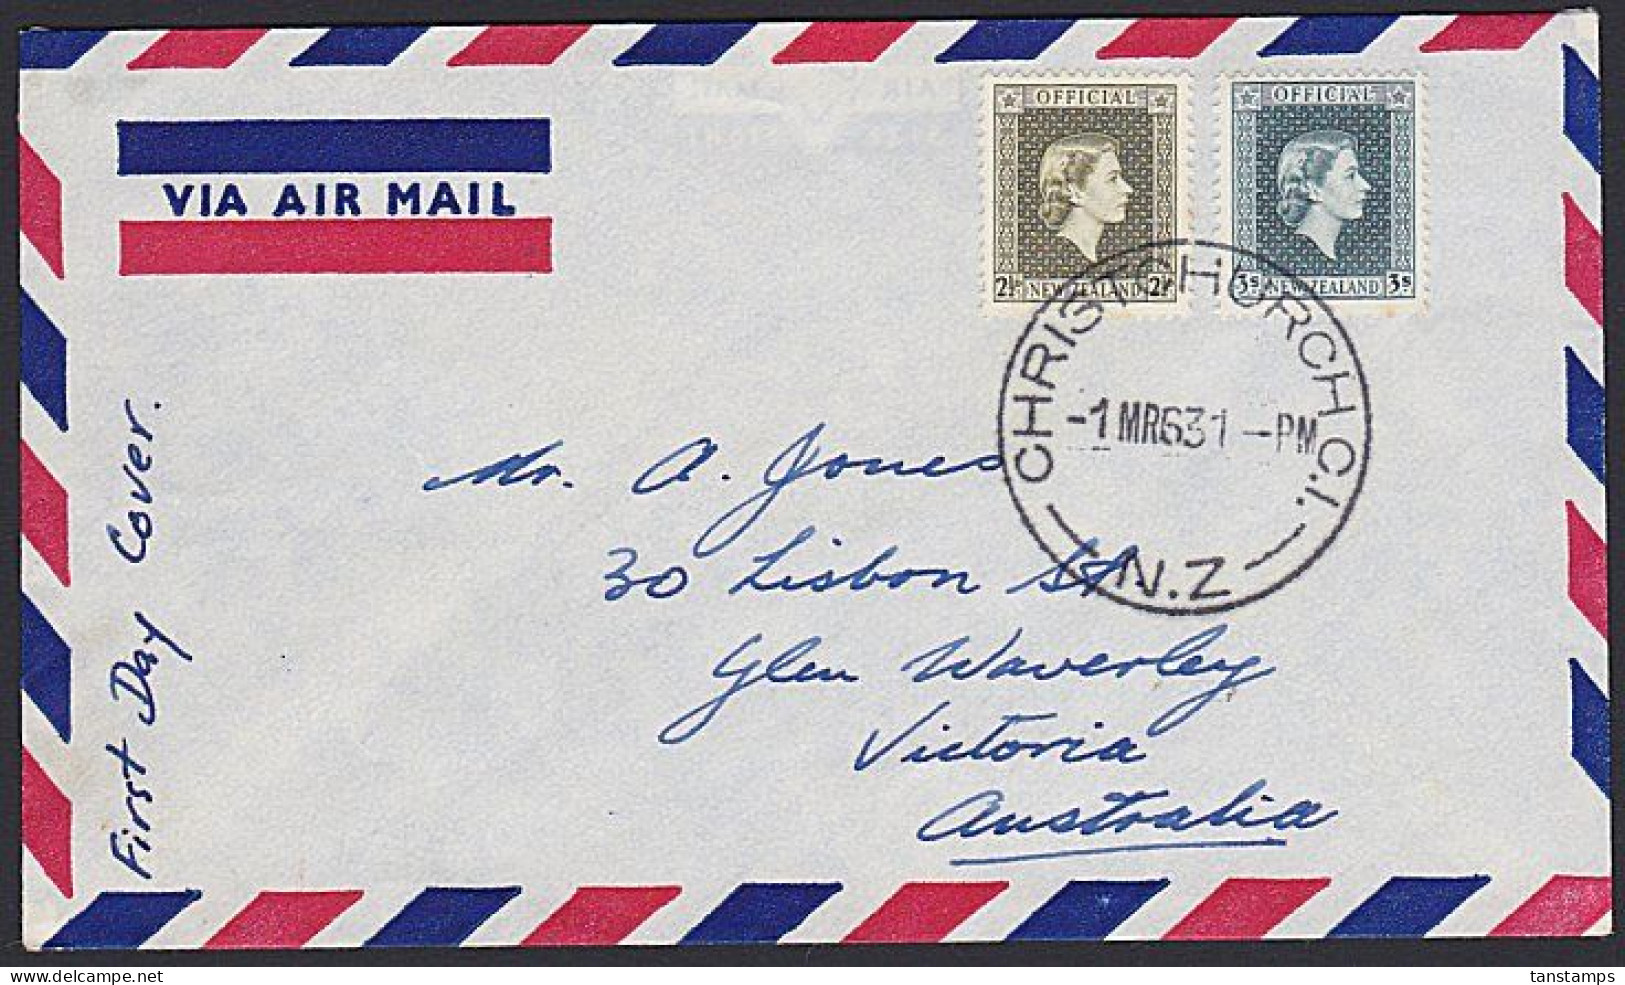 QEII OFFICIAL FDC AIRMAIL TO AUSTRALIA - Airmail